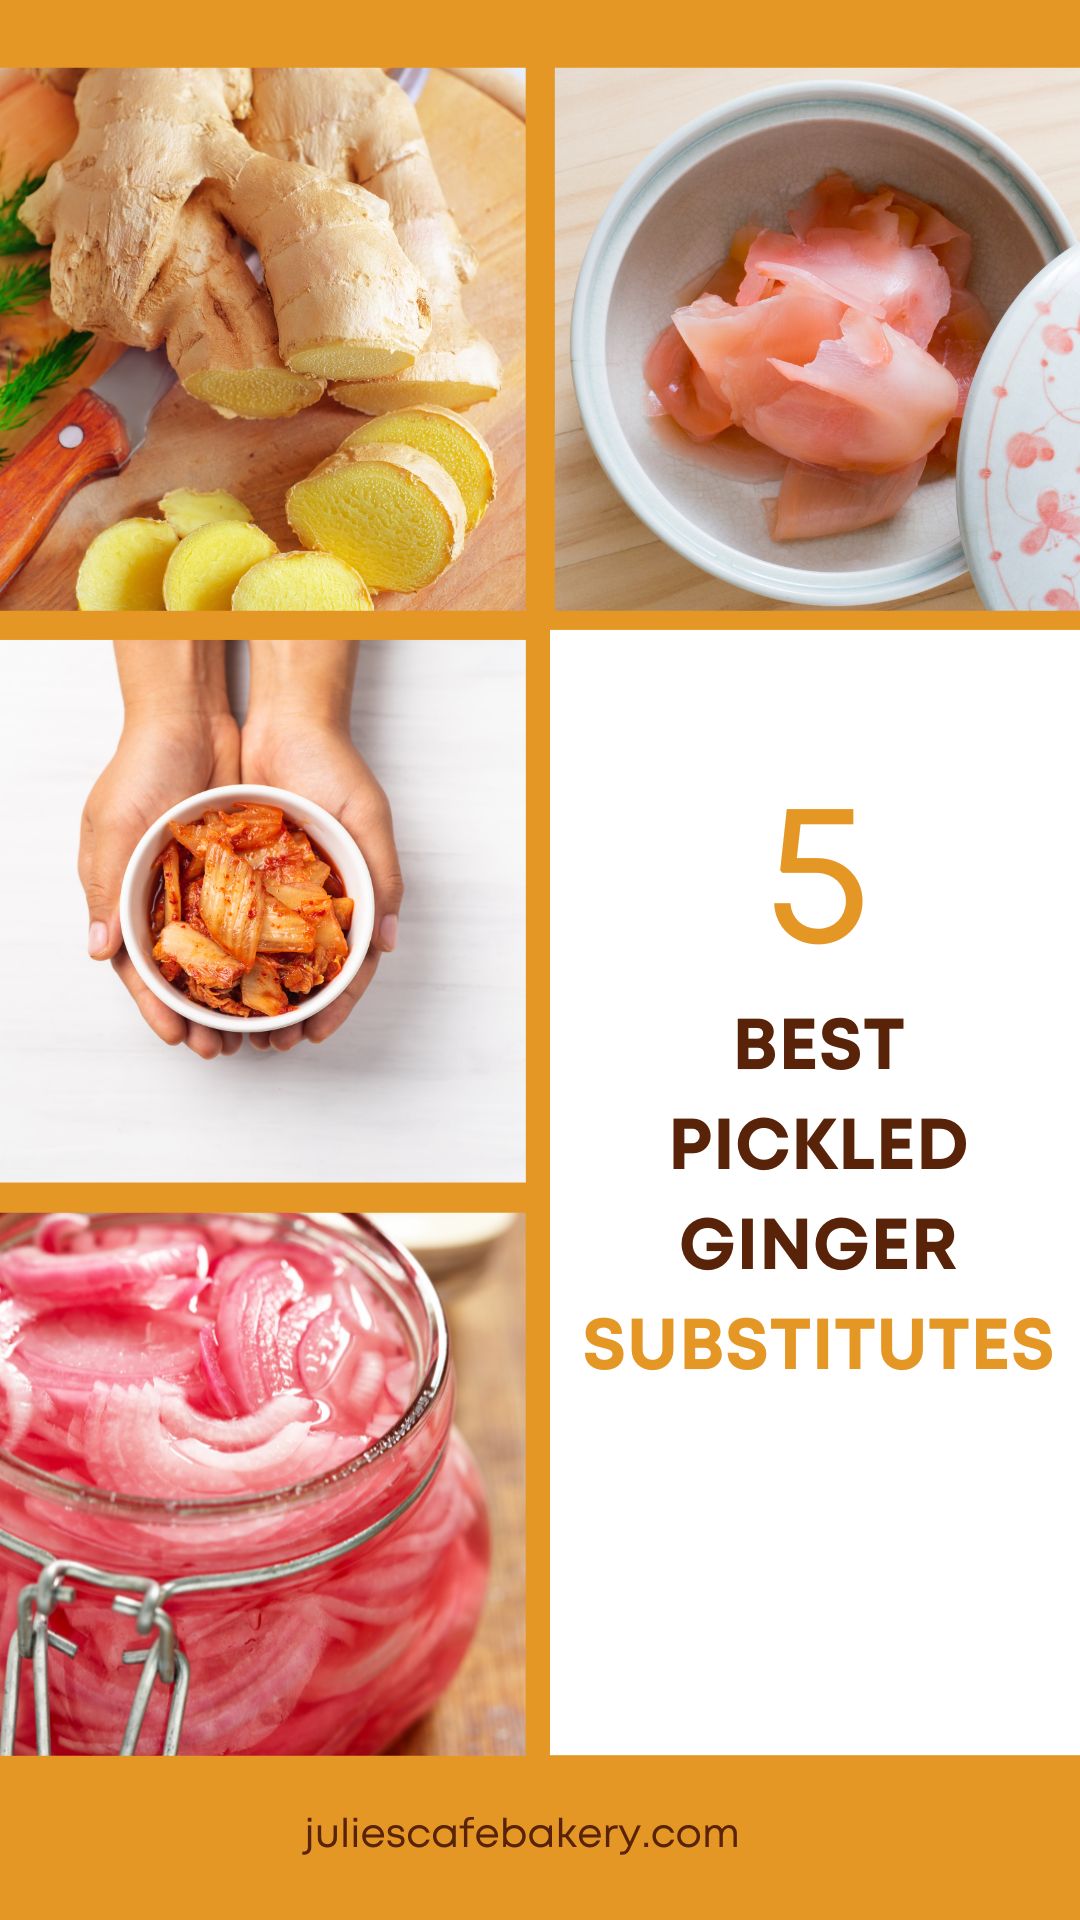 5 Pickled Ginger Substitutes & When to Use Them